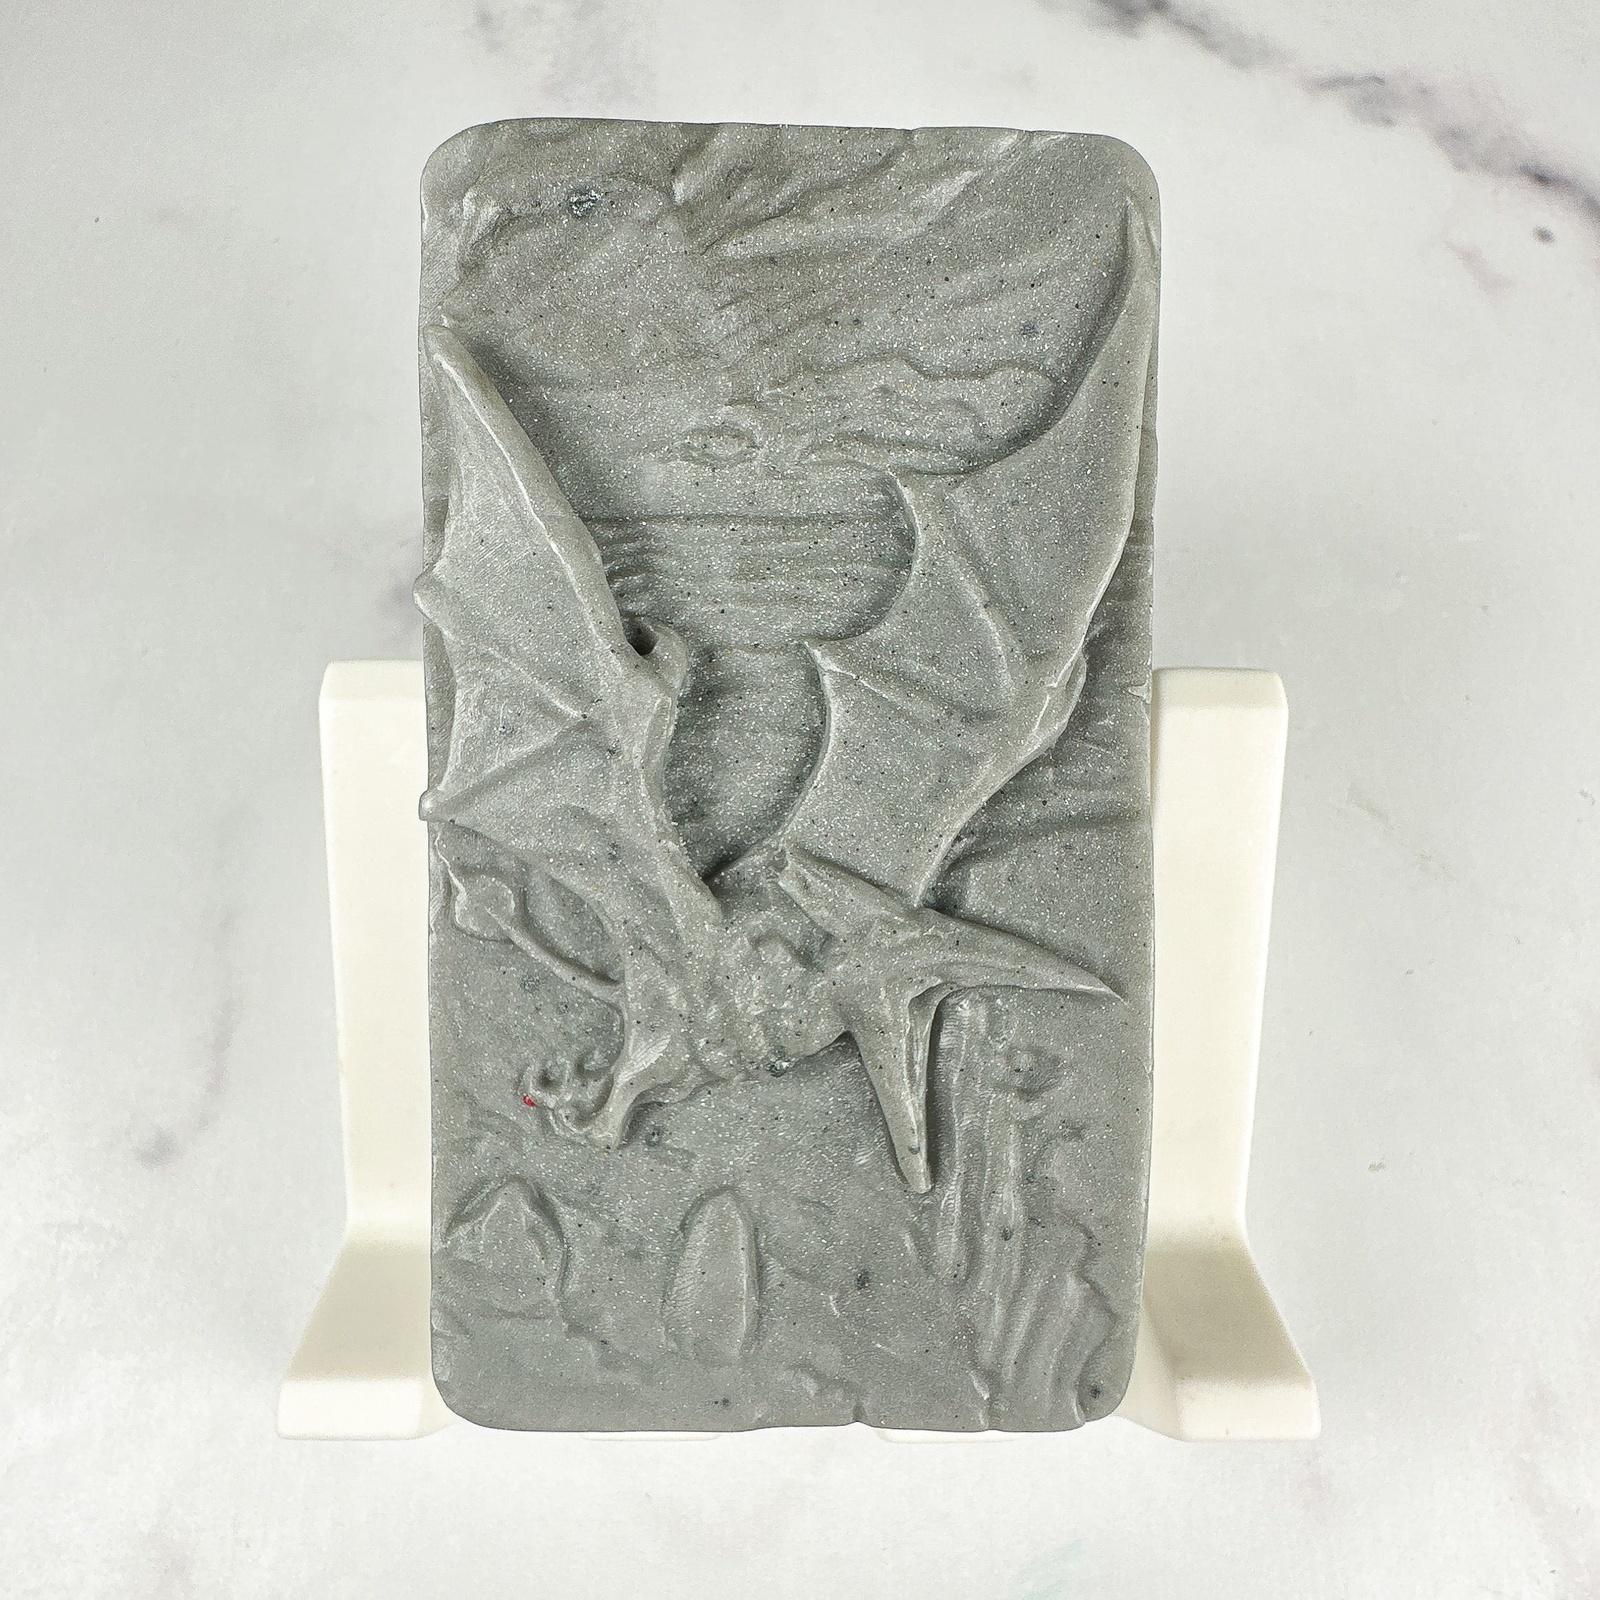 Pterodactyl Soap Bar - The Serpentry